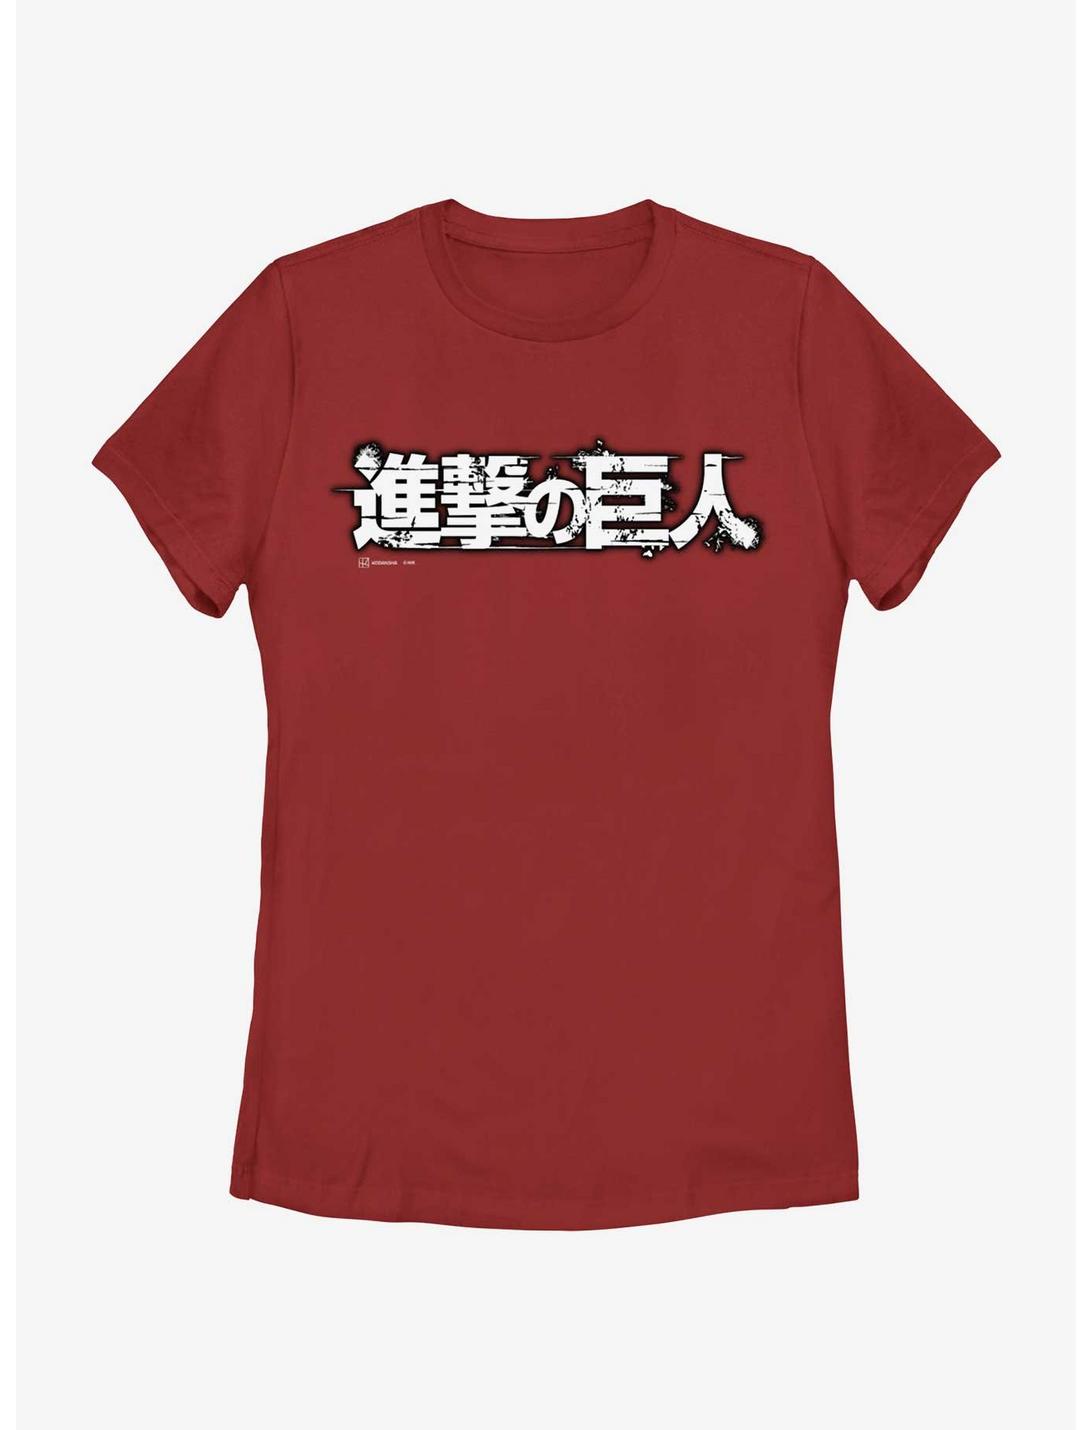 Attack on Titan Japanese Logo Womens T-Shirt, RED, hi-res